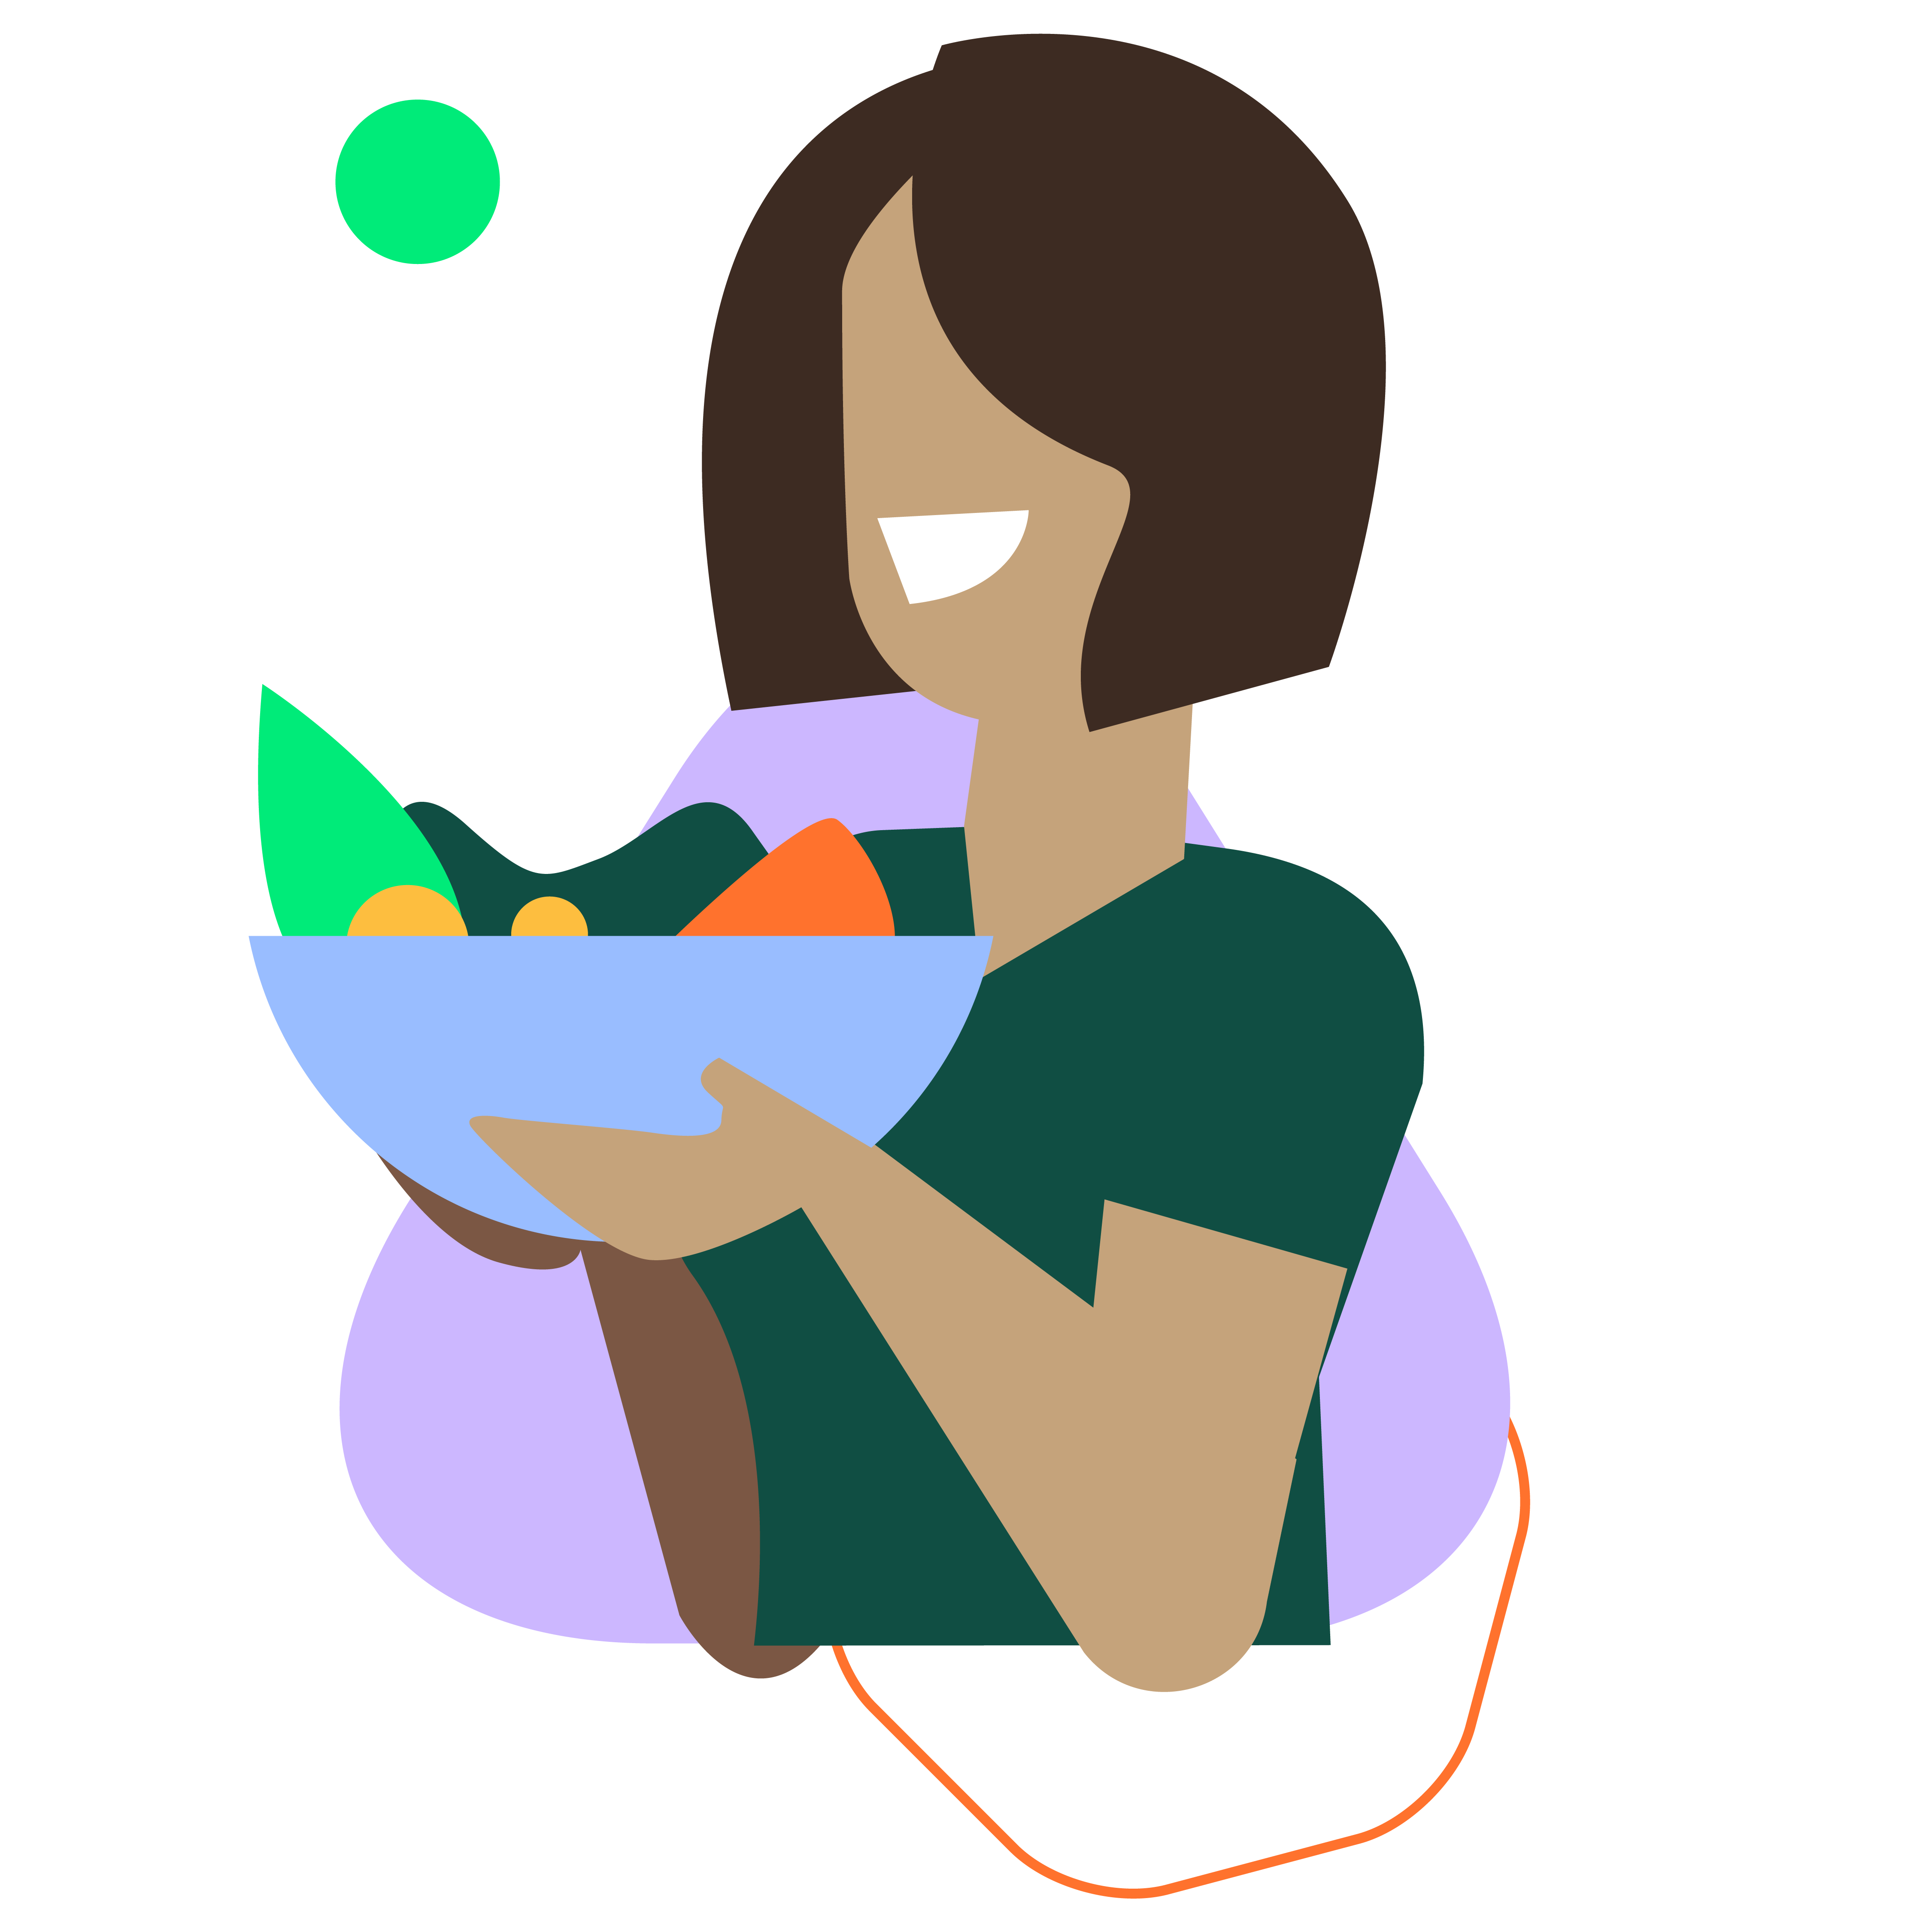 An illustration of a woman smiling holding up a bowl of fruit. She has brown hair and a green t-shirt on.